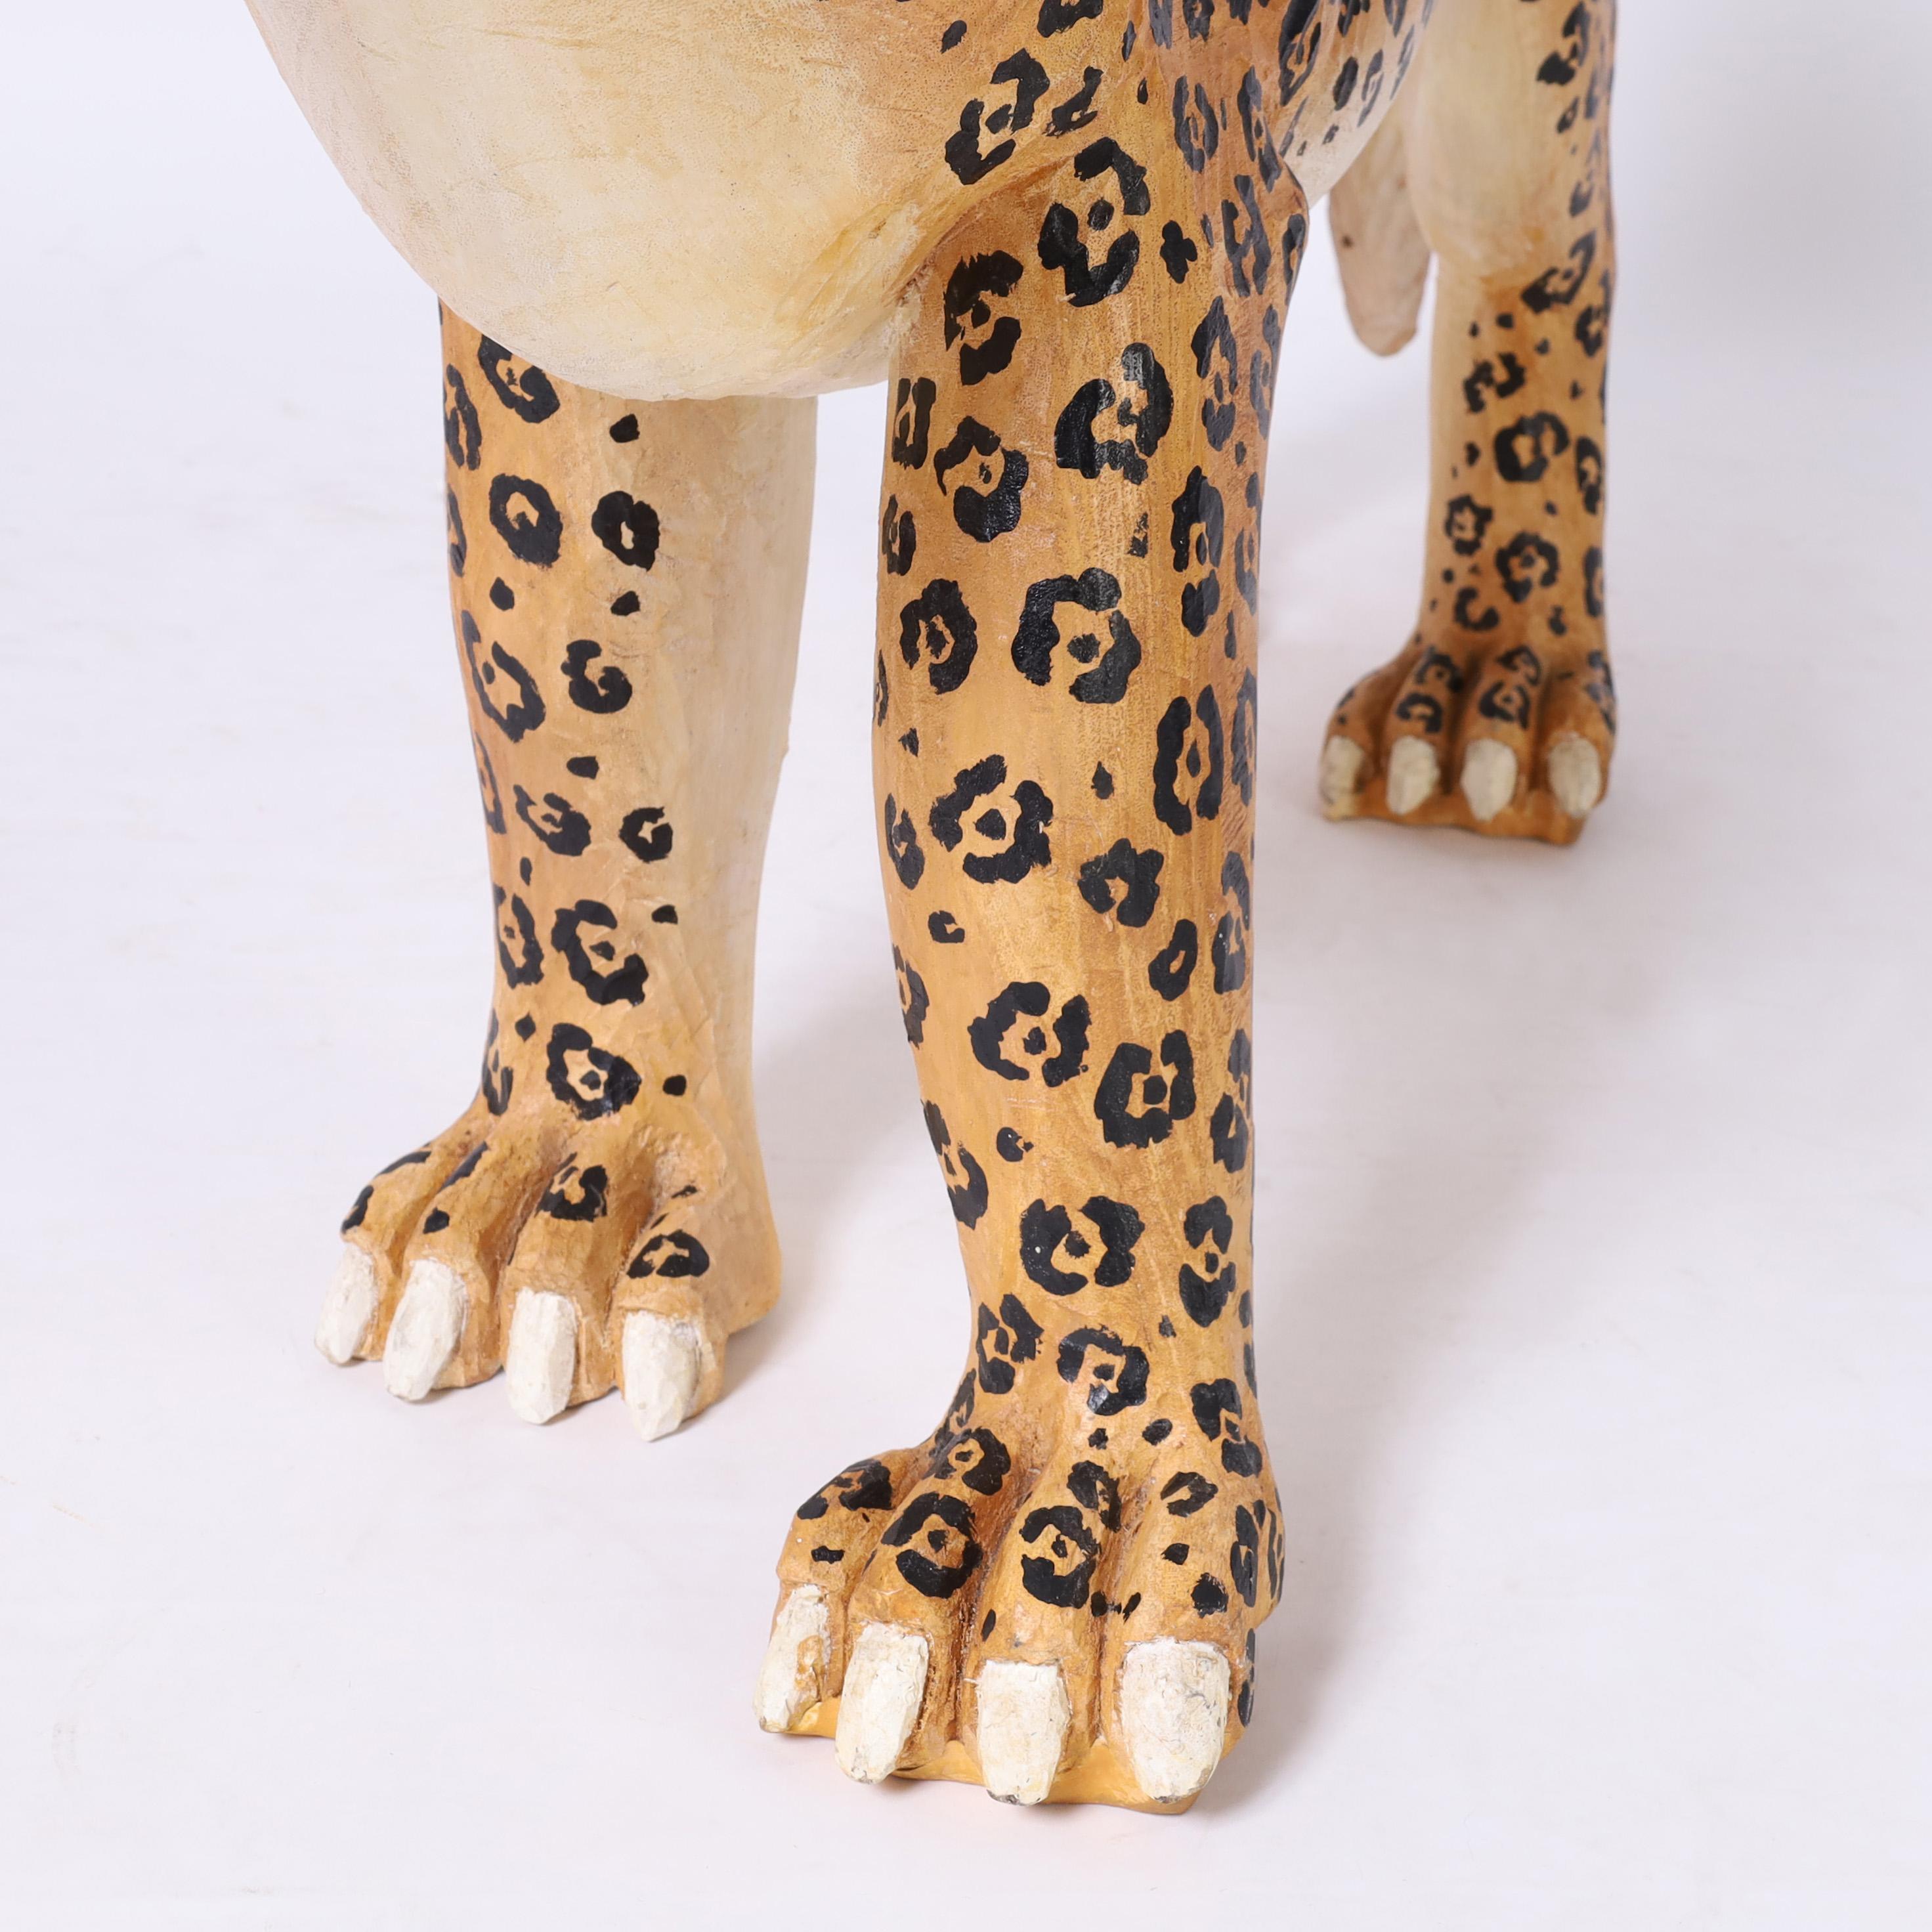 Carved and Painted Wood Jaguar or Big Cat For Sale 2